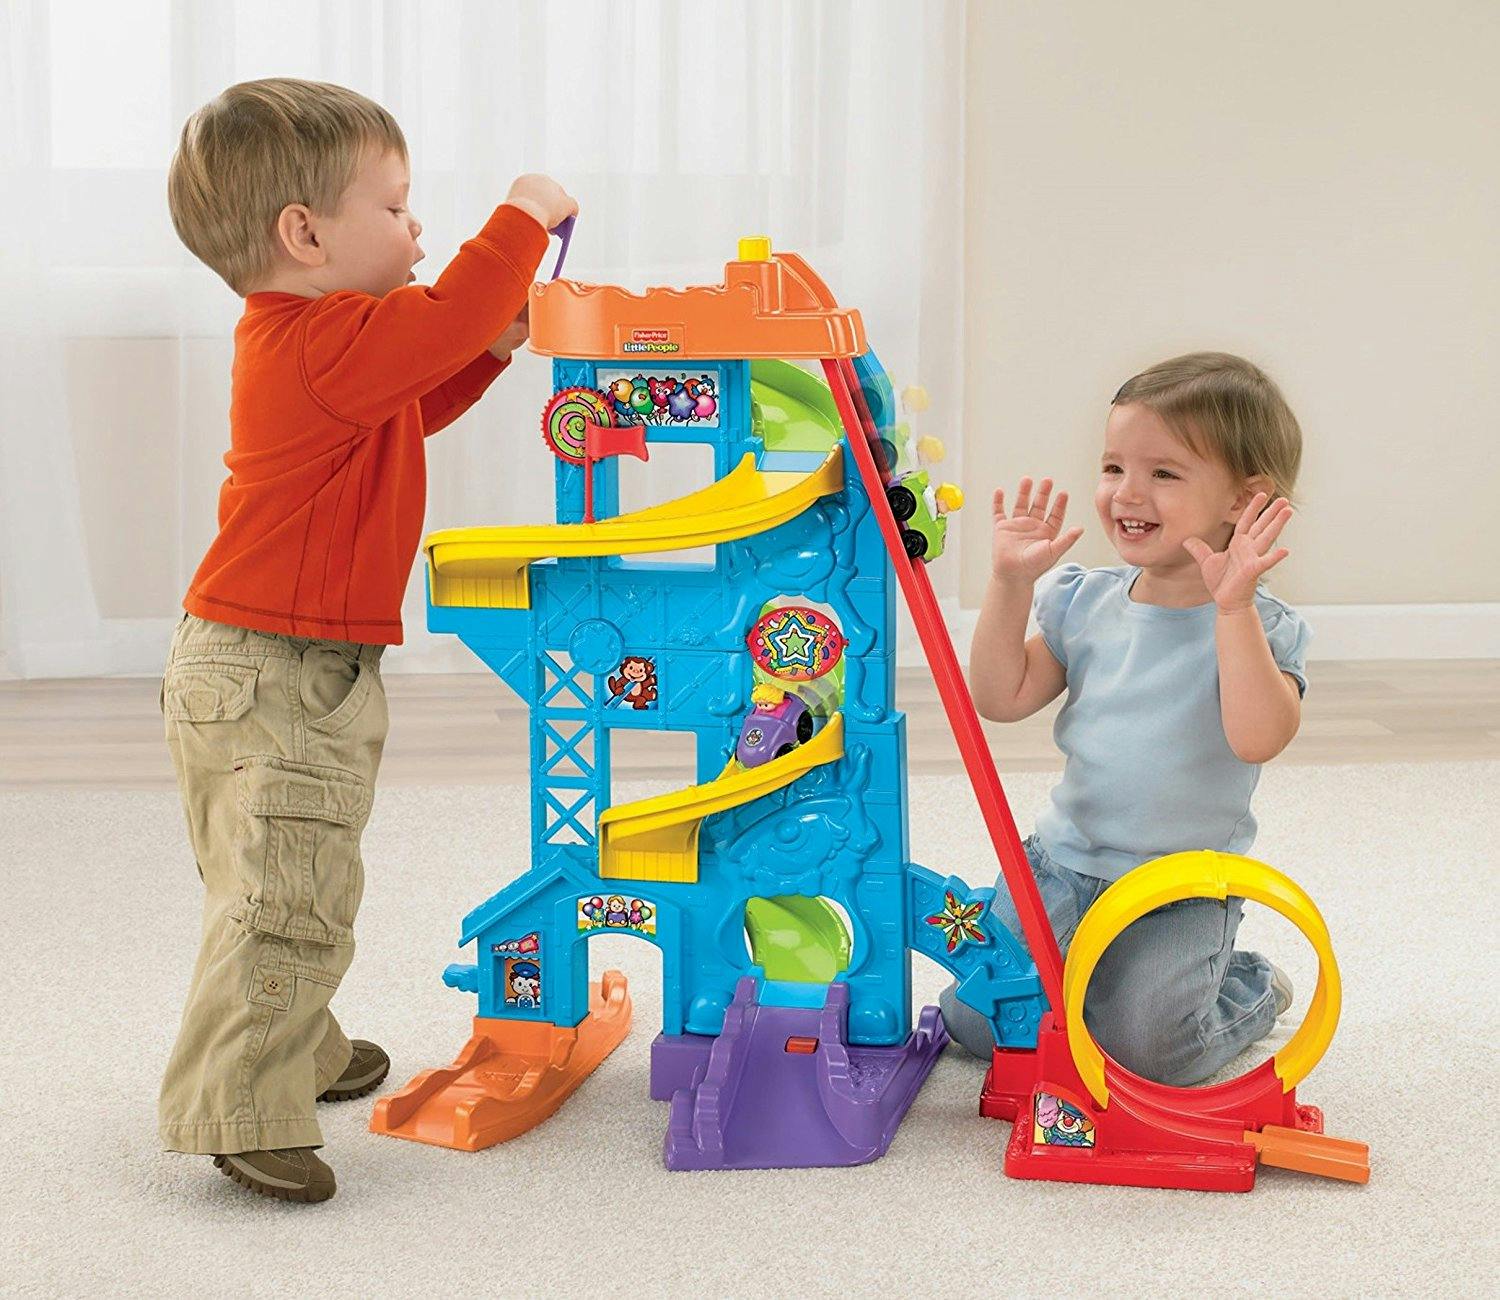 fisher price loops and swoops target